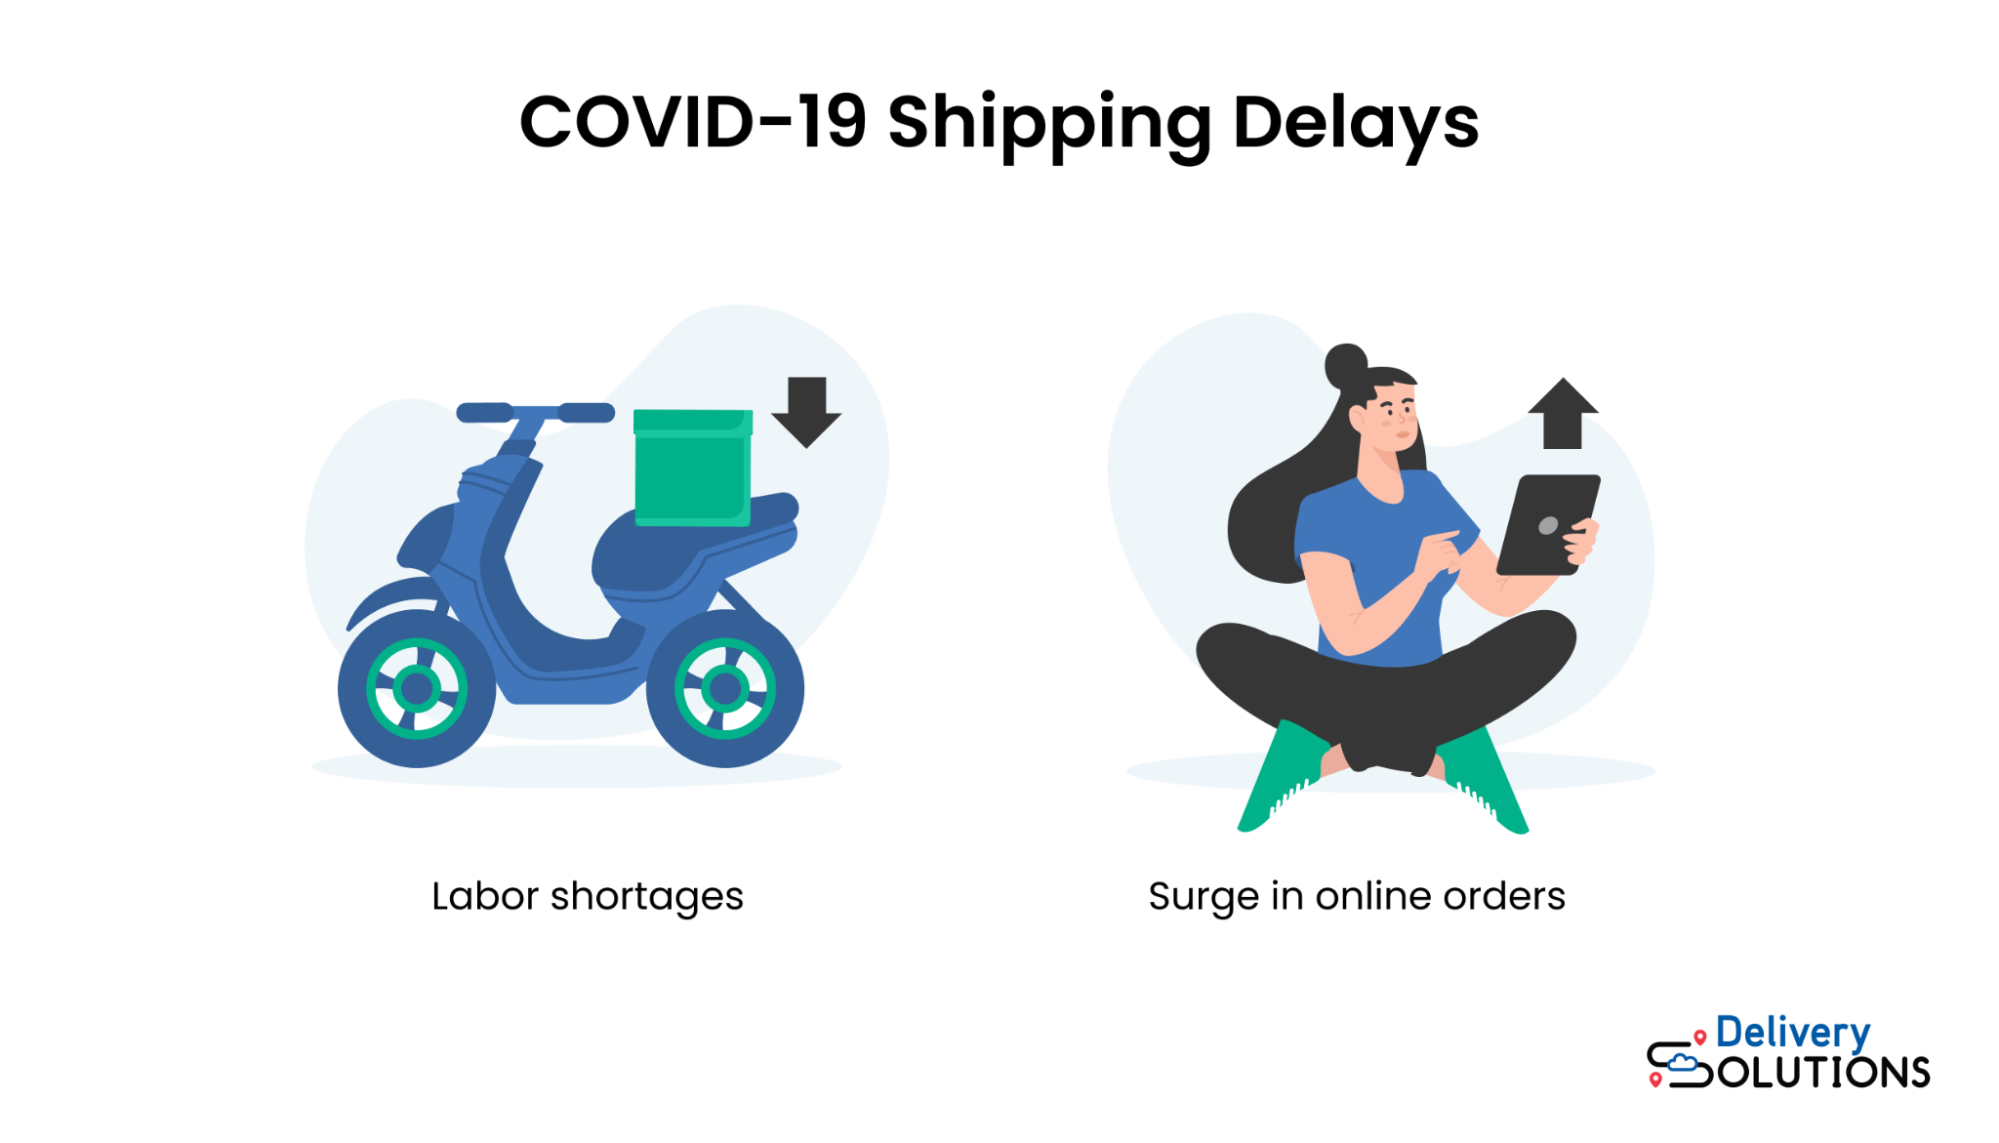 COVID-19 shipping delays causes